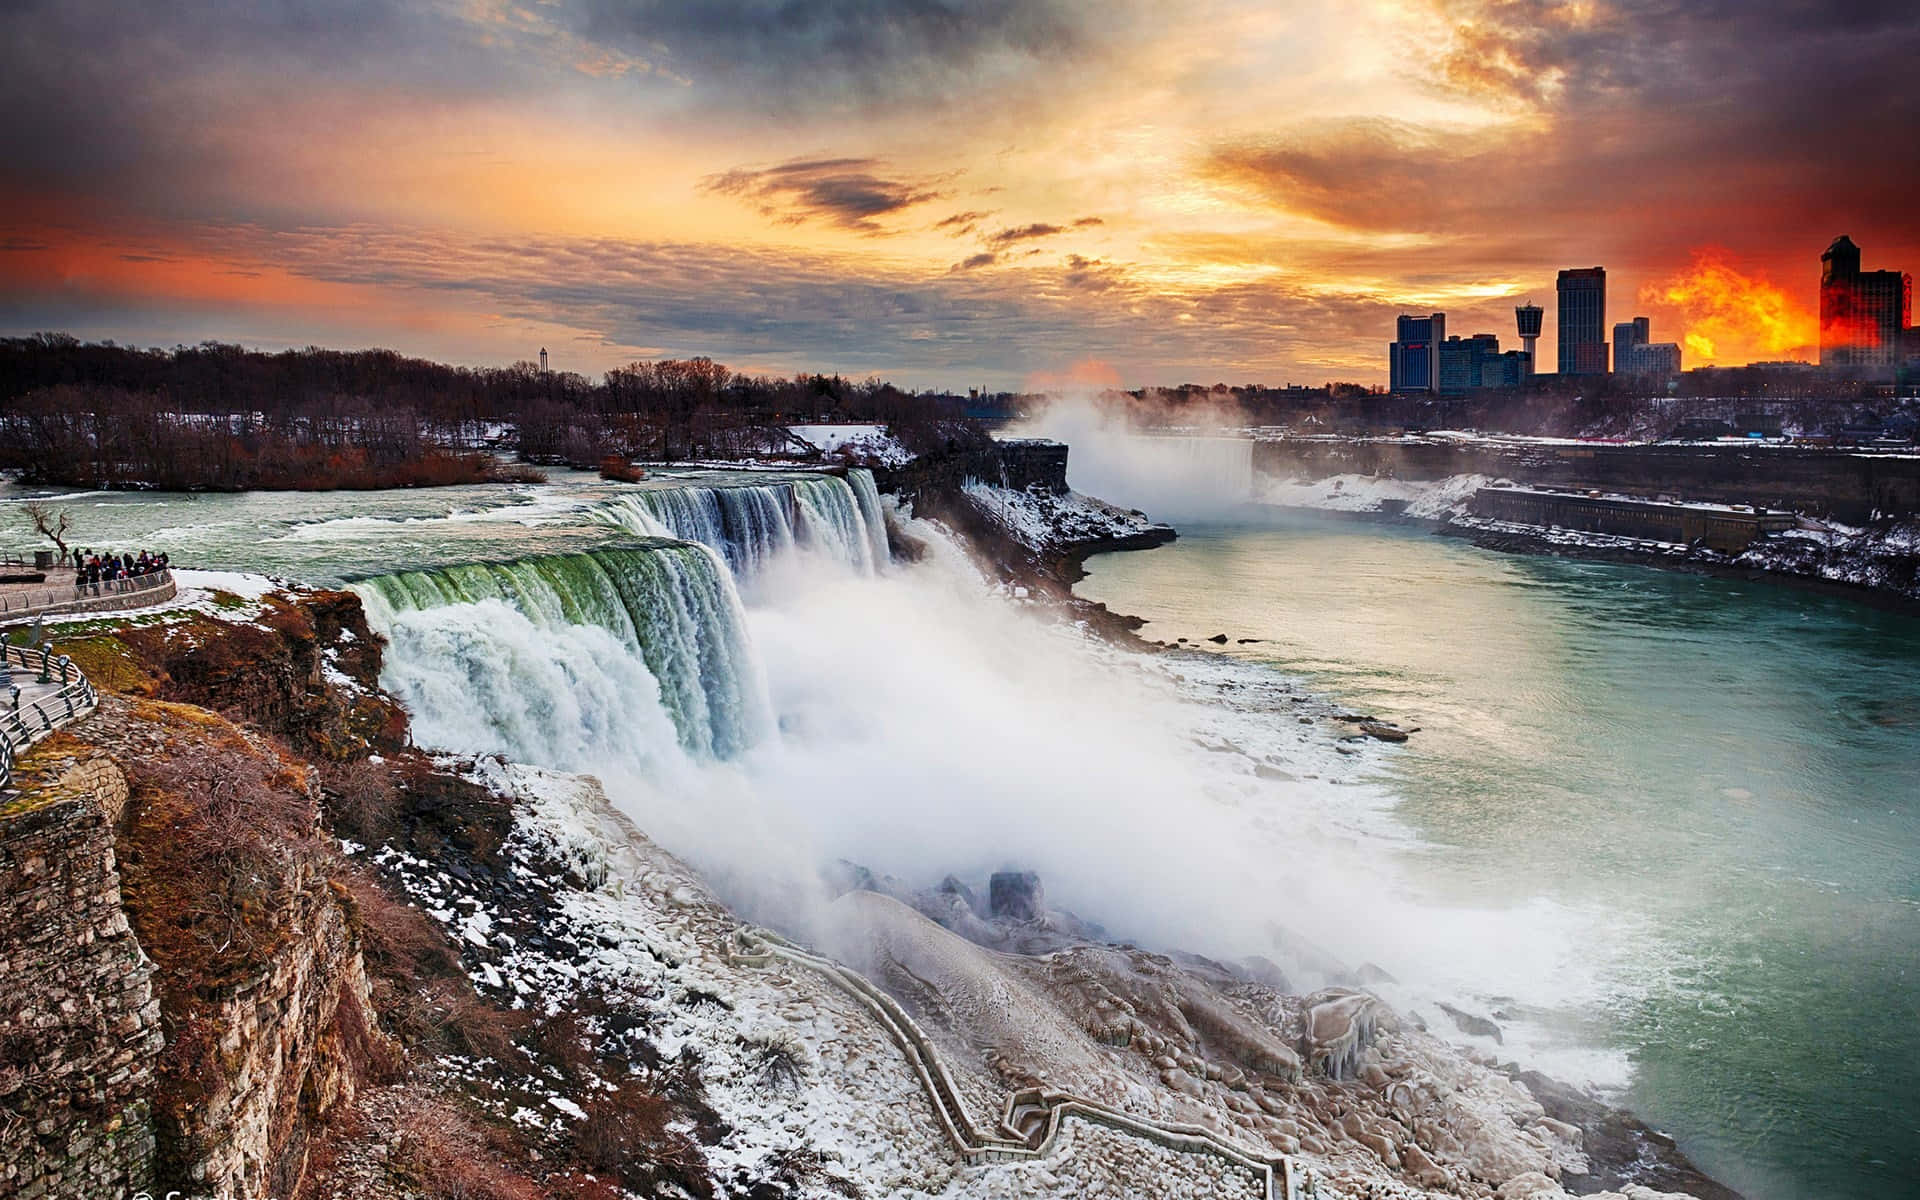 A Picture Perfect View of Niagara Falls